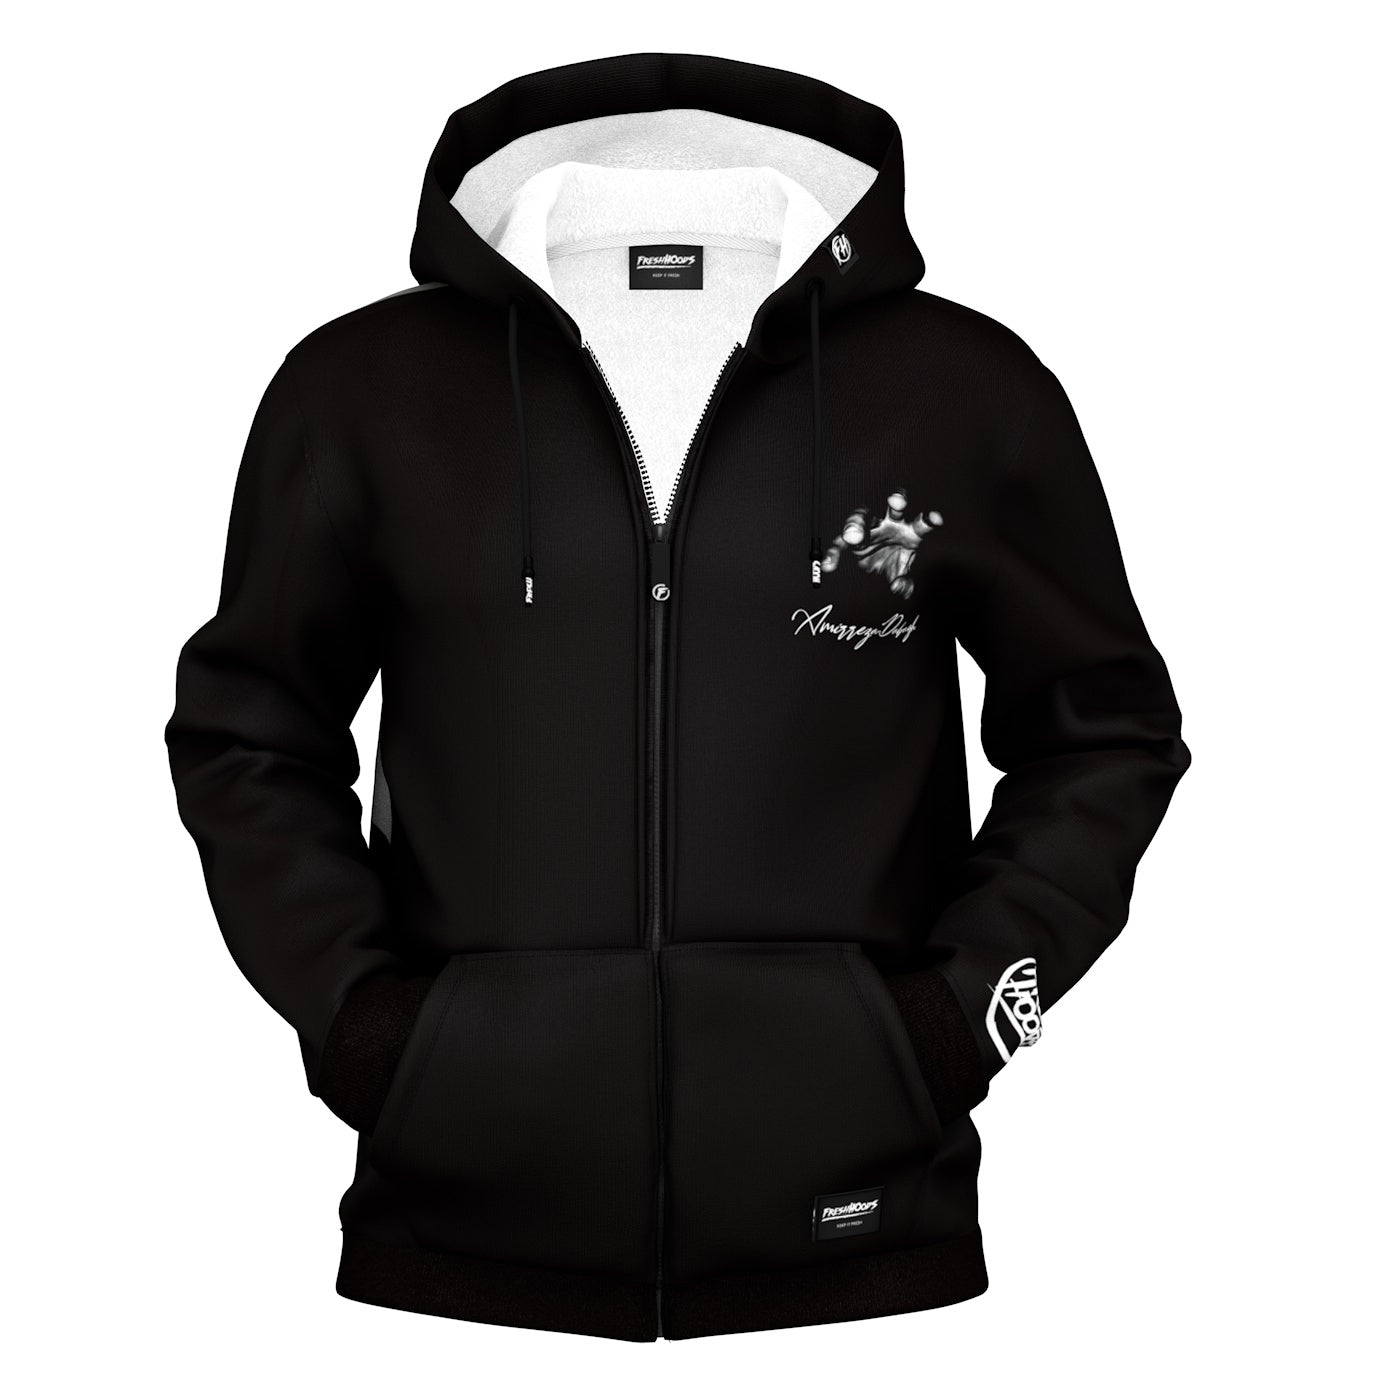 The Other Side Zip Up Hoodie